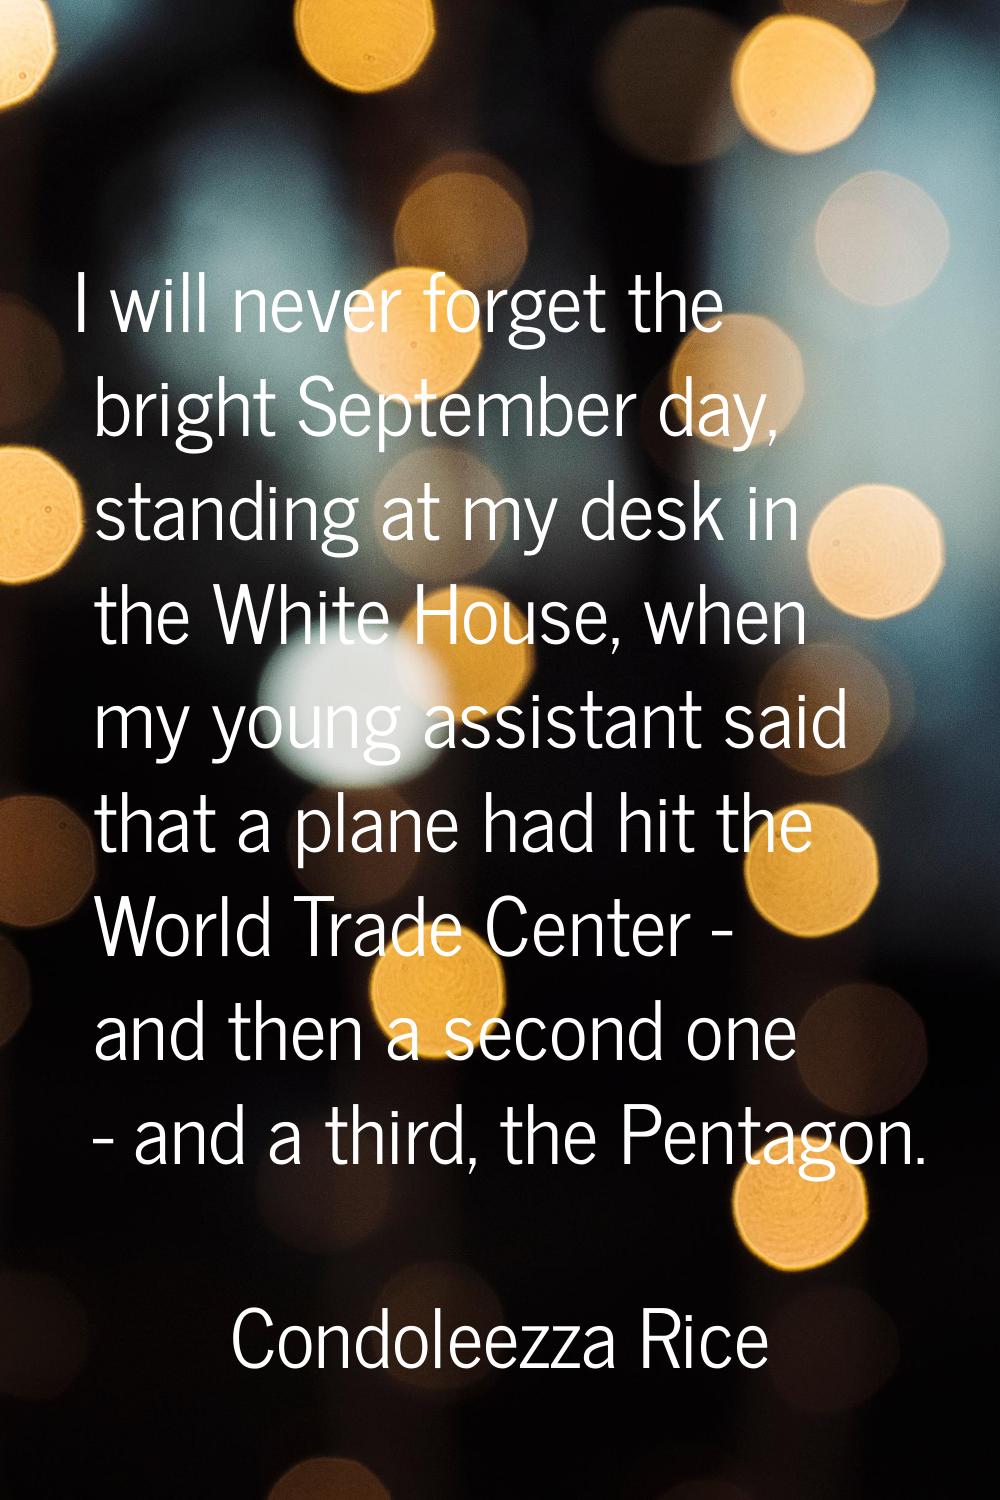 I will never forget the bright September day, standing at my desk in the White House, when my young